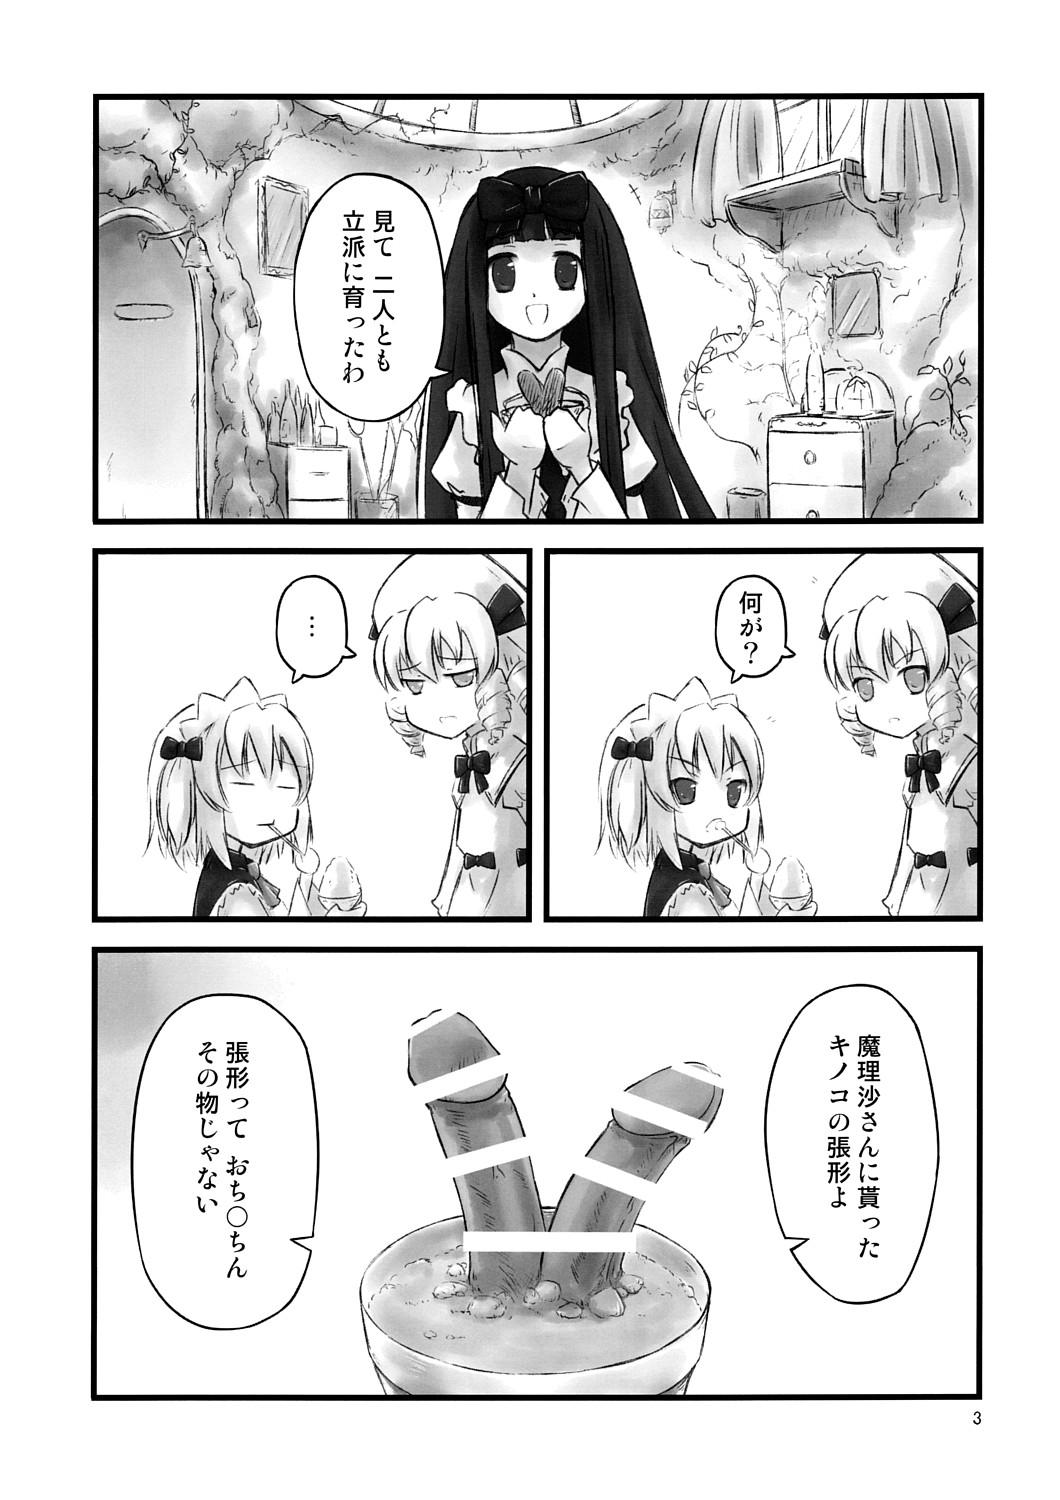 Nipples cook off - Touhou project Stranger - Page 2